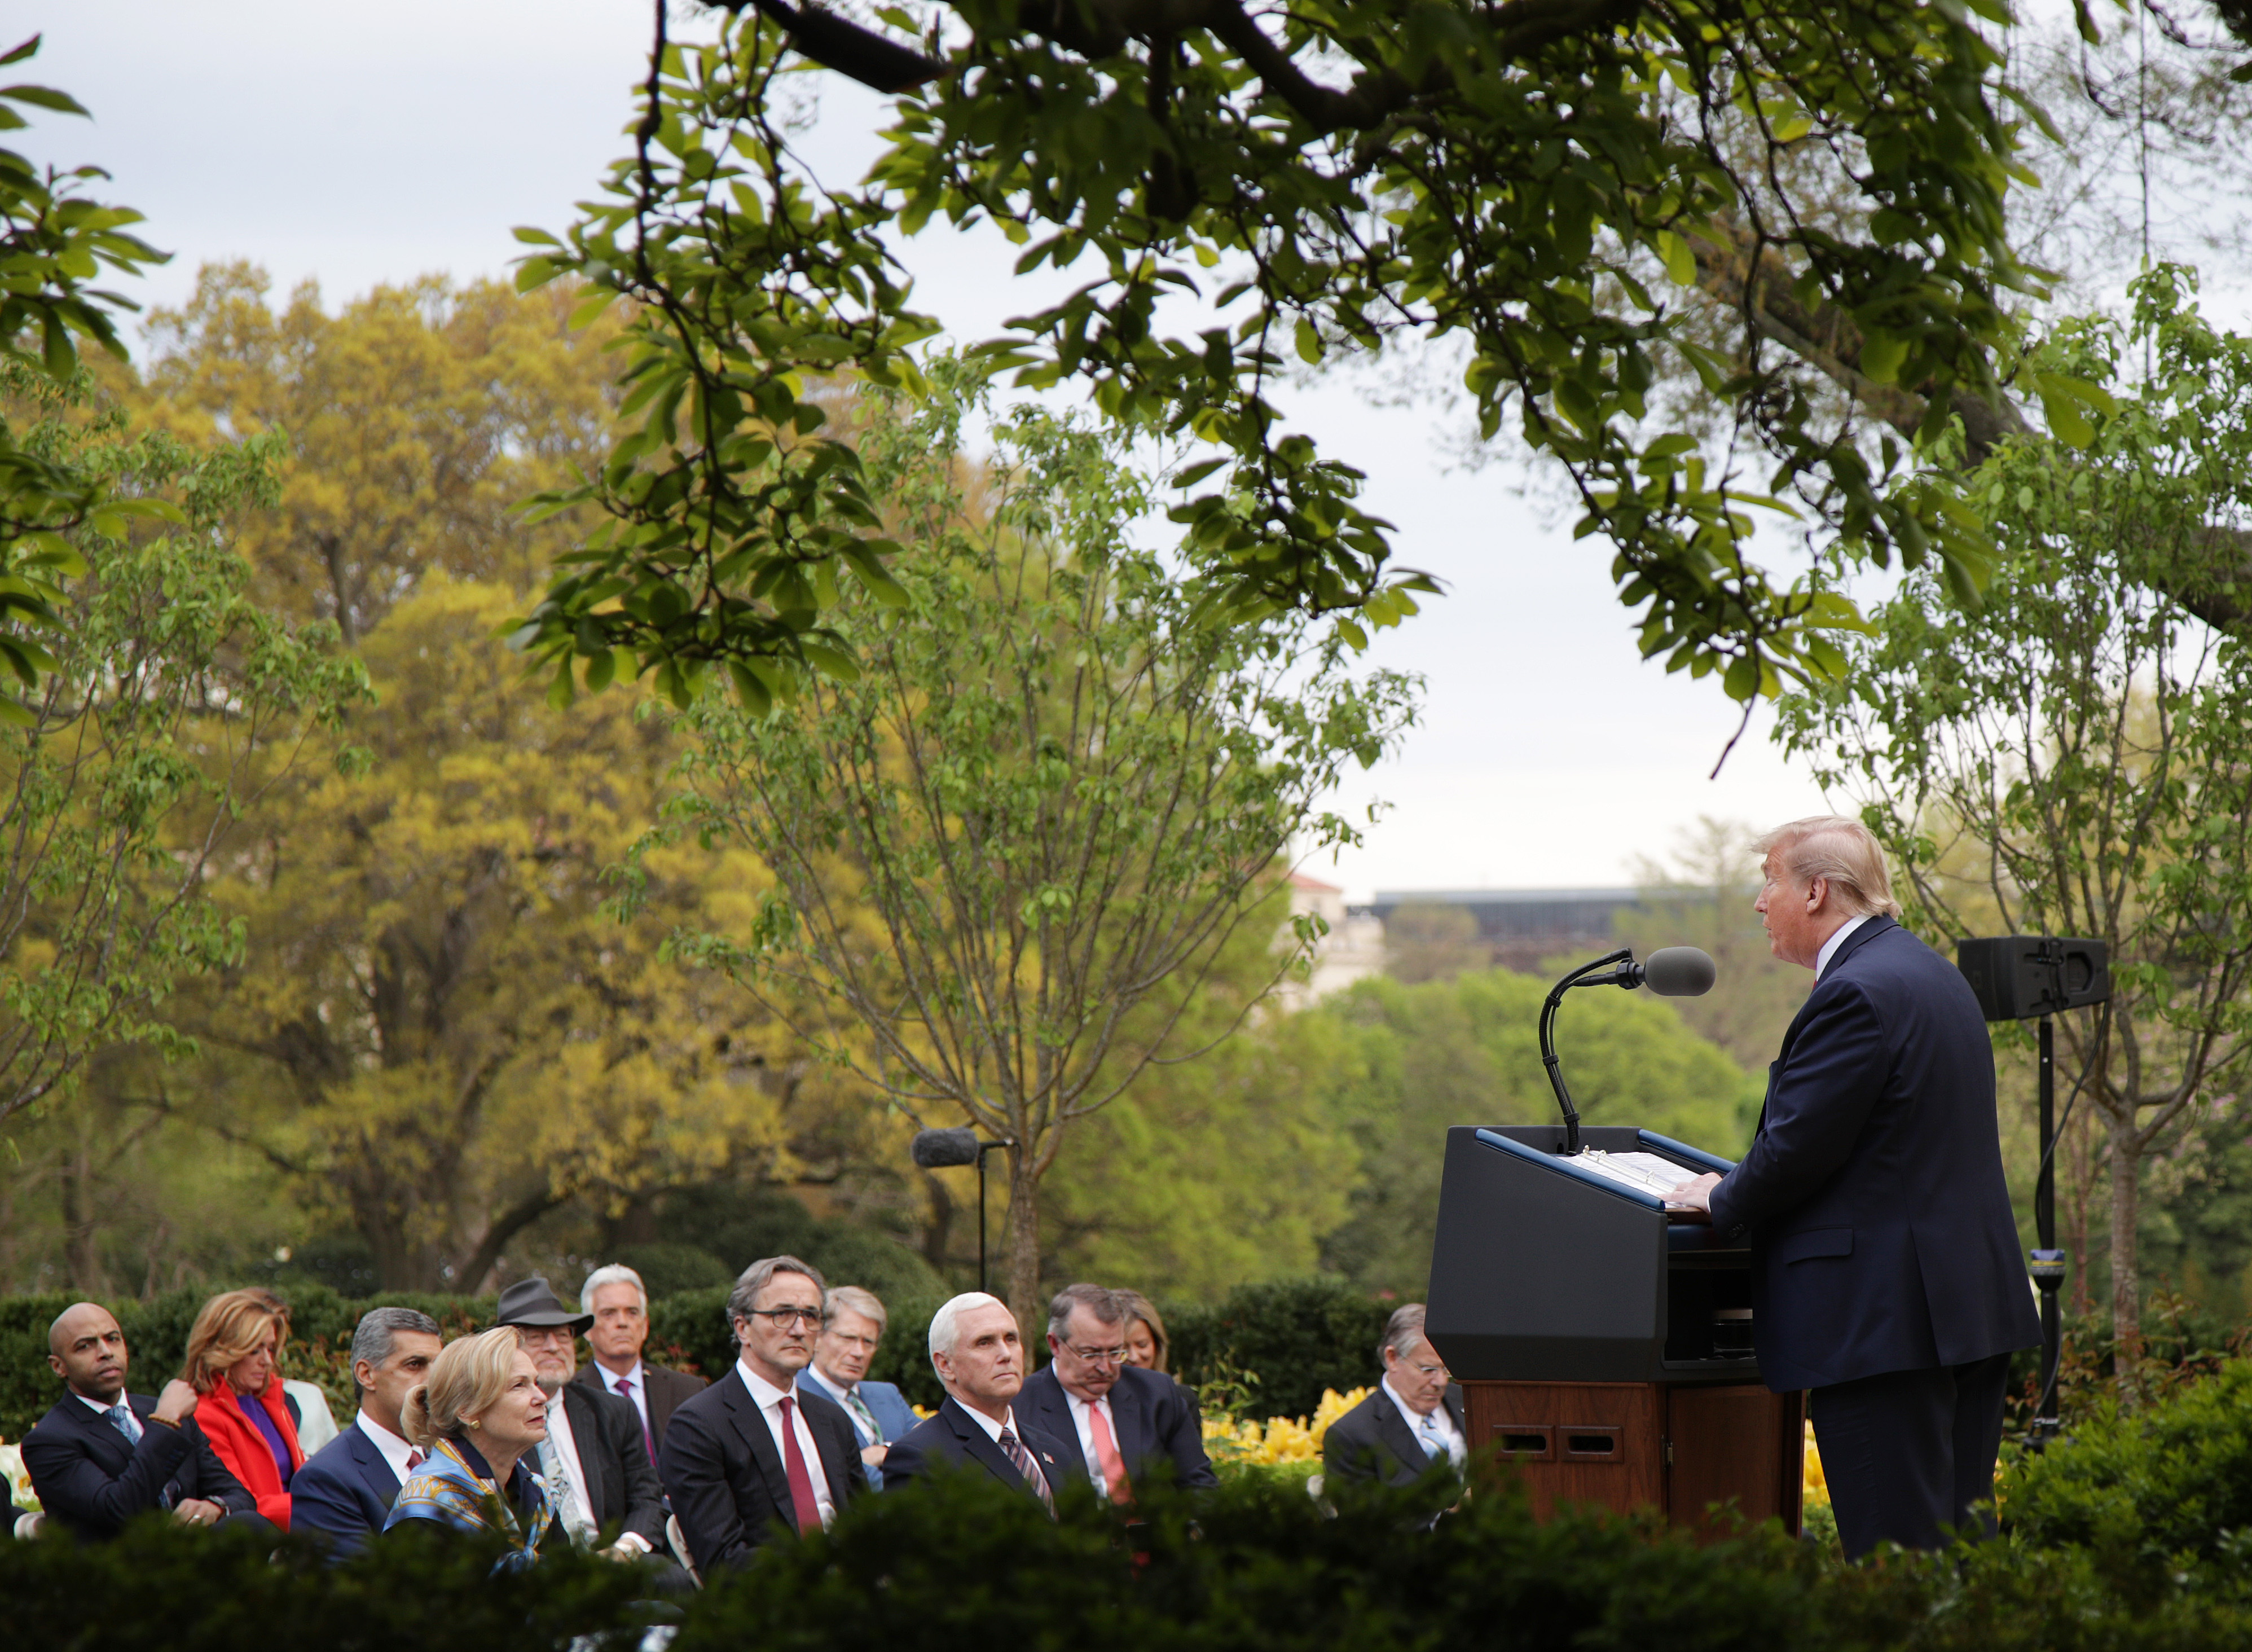 WASHINGTON, DC - APRIL 14: U.S. President Donald Trump speaks during the daily briefing of the White House Coronavirus Task Force, in the Rose Garden at the White House April 14, 2020 in Washington, DC. President Trump is expected to announce a new task force dedicated to reopening the country and will be headed by president’s chief of staff Mark Meadows, a former Republican Congressman from North Carolina. (Photo by Alex Wong/Getty Images)